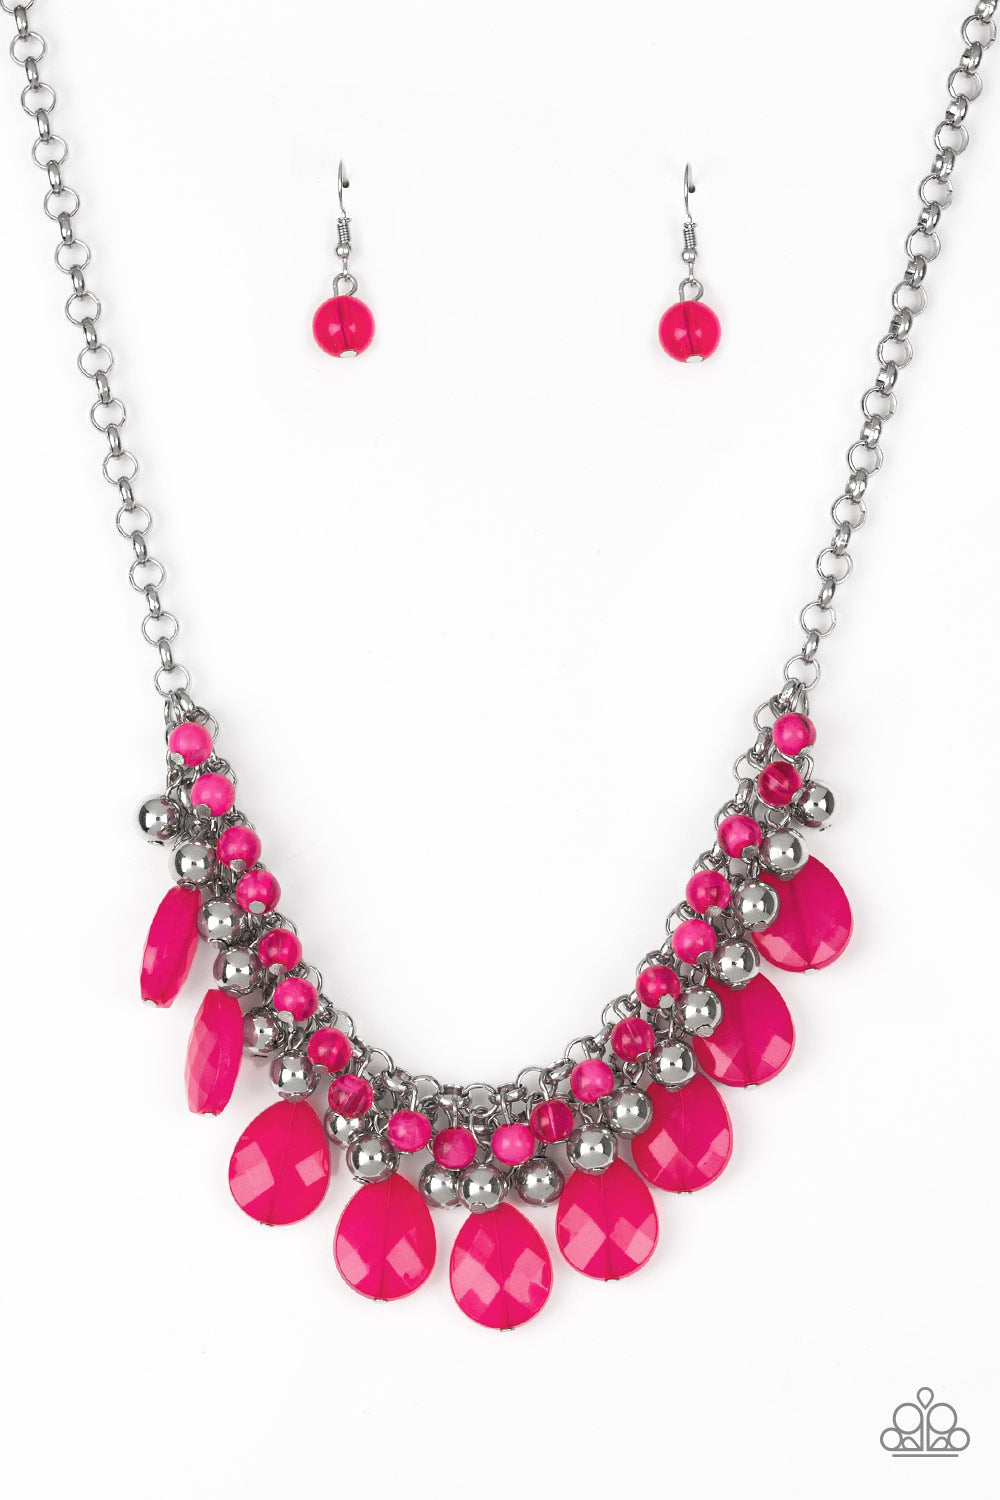 Trending Tropicana - Pink and Silver Necklace - Paparazzi Accessories - Cloudy pink beads and shiny silver beads. Brushed in an opalescent finish, pink teardrops cascade from the bottom of bold interlocking silver chains, for a dramatic colorful fringe fashion necklace.